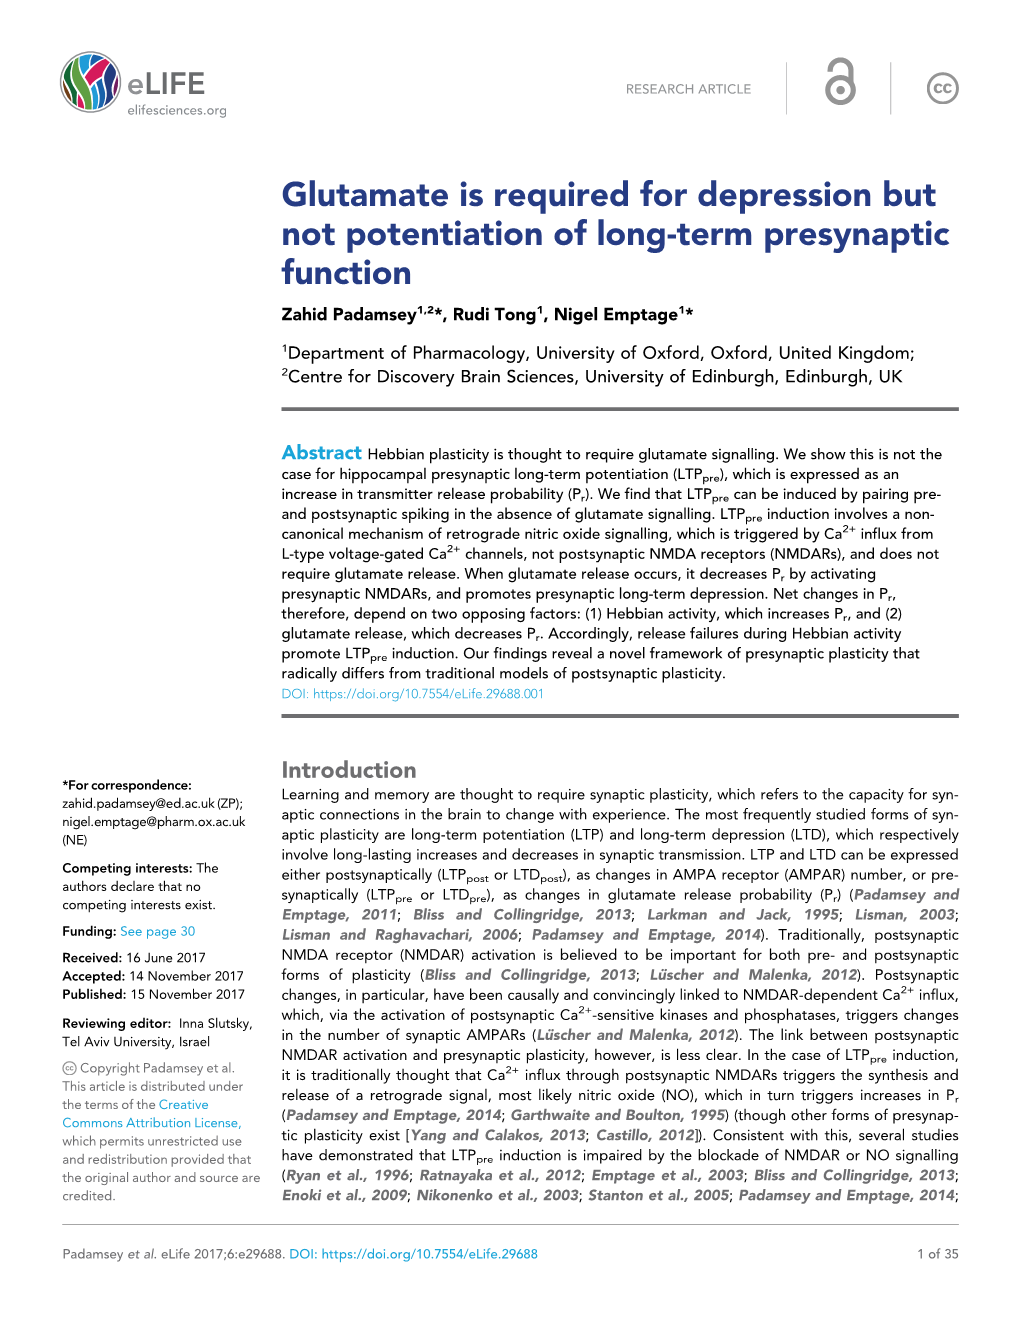 Glutamate Is Required for Depression but Not Potentiation of Long-Term Presynaptic Function Zahid Padamsey1,2*, Rudi Tong1, Nigel Emptage1*